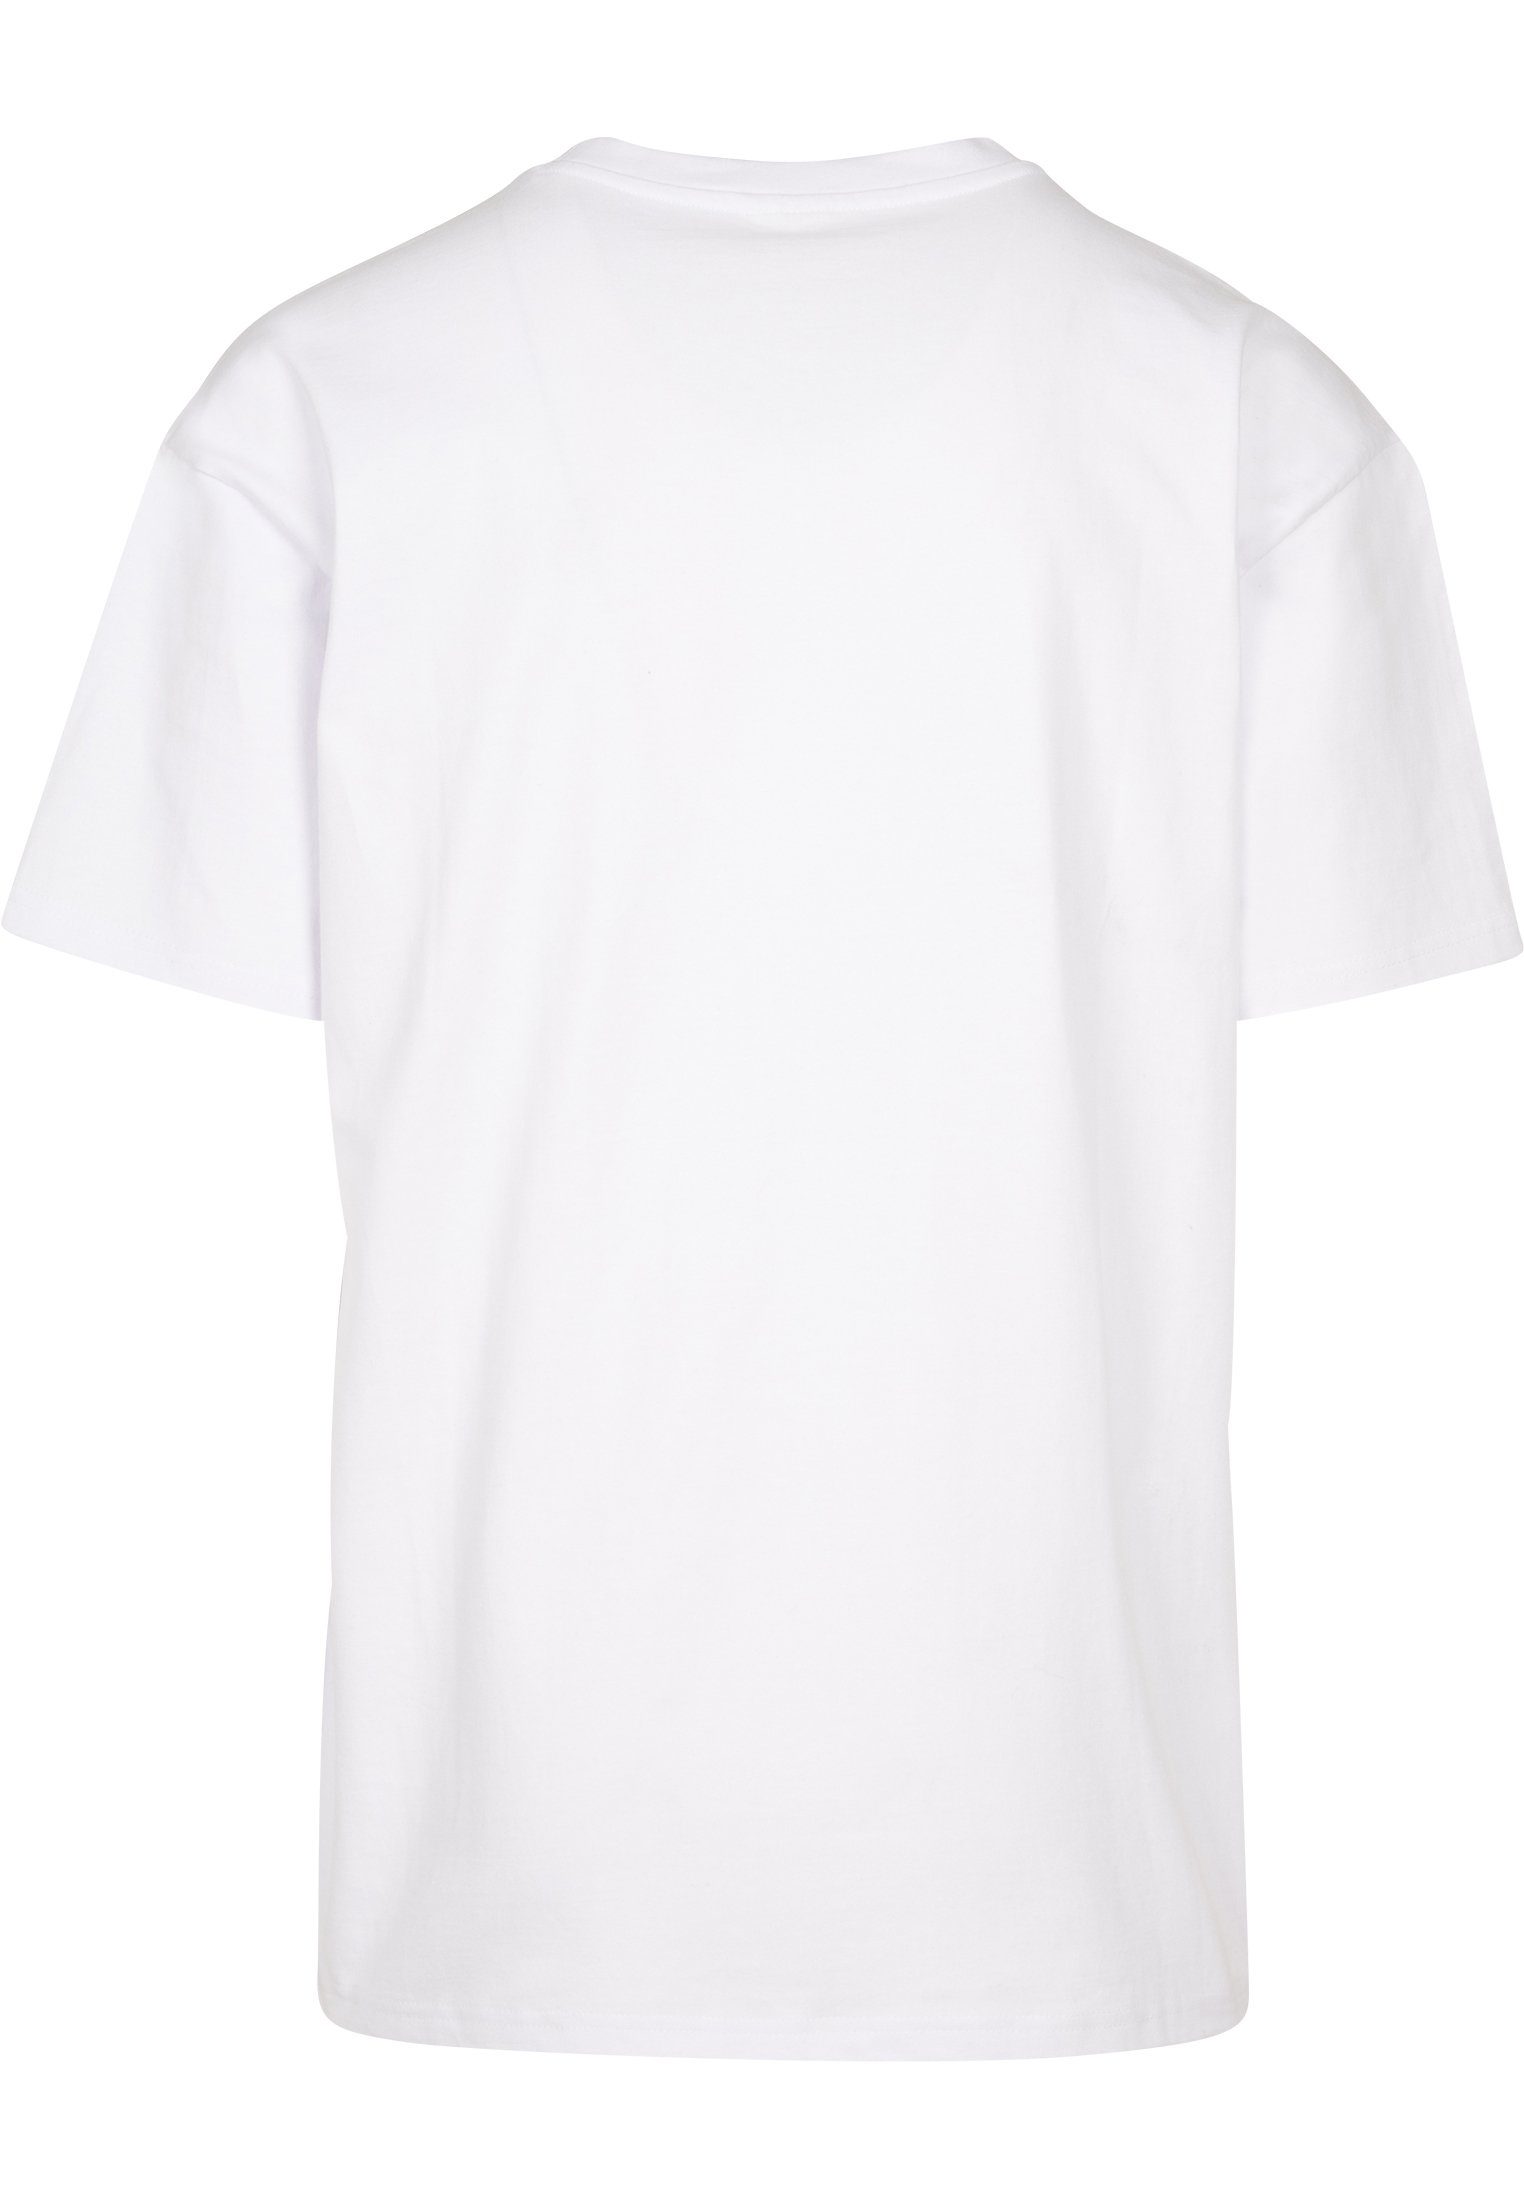 Mister (1-tlg) Accessoires Tee white Kurzarmshirt Moon by Phases Upscale Tee